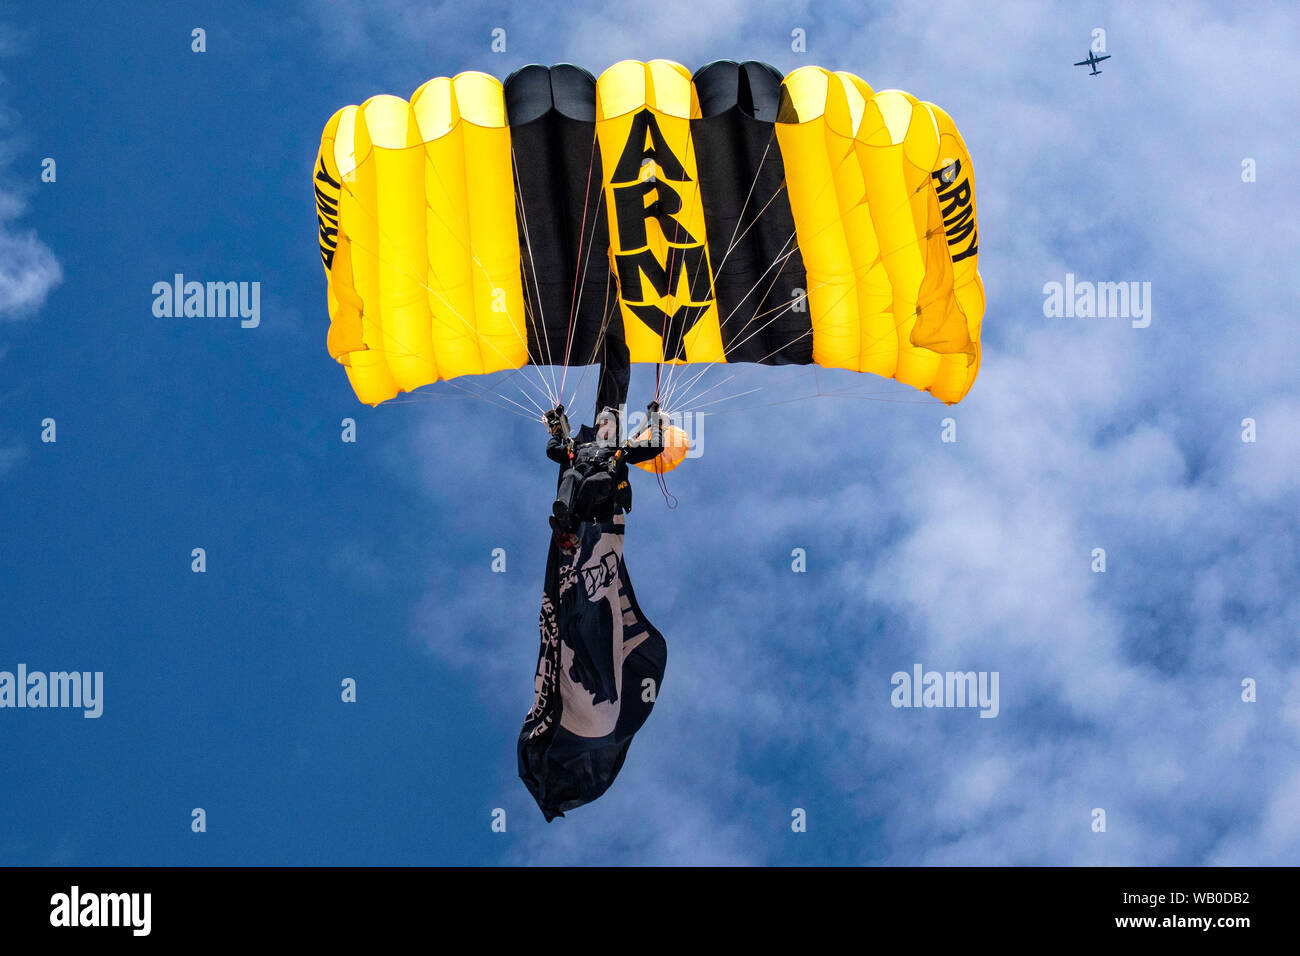 A U.S. Army Soldier with the U.S. Army Golden Knights Parachute Team prepares to land at show center while a C-31A Troopship orbits above during the 2019 Atlantic City International Airshow “A Salute To Those That Serve” at Atlantic City, N.J., Aug. 21, 2019. (New Jersey National Guard photo by Mark C. Olsen) Stock Photo